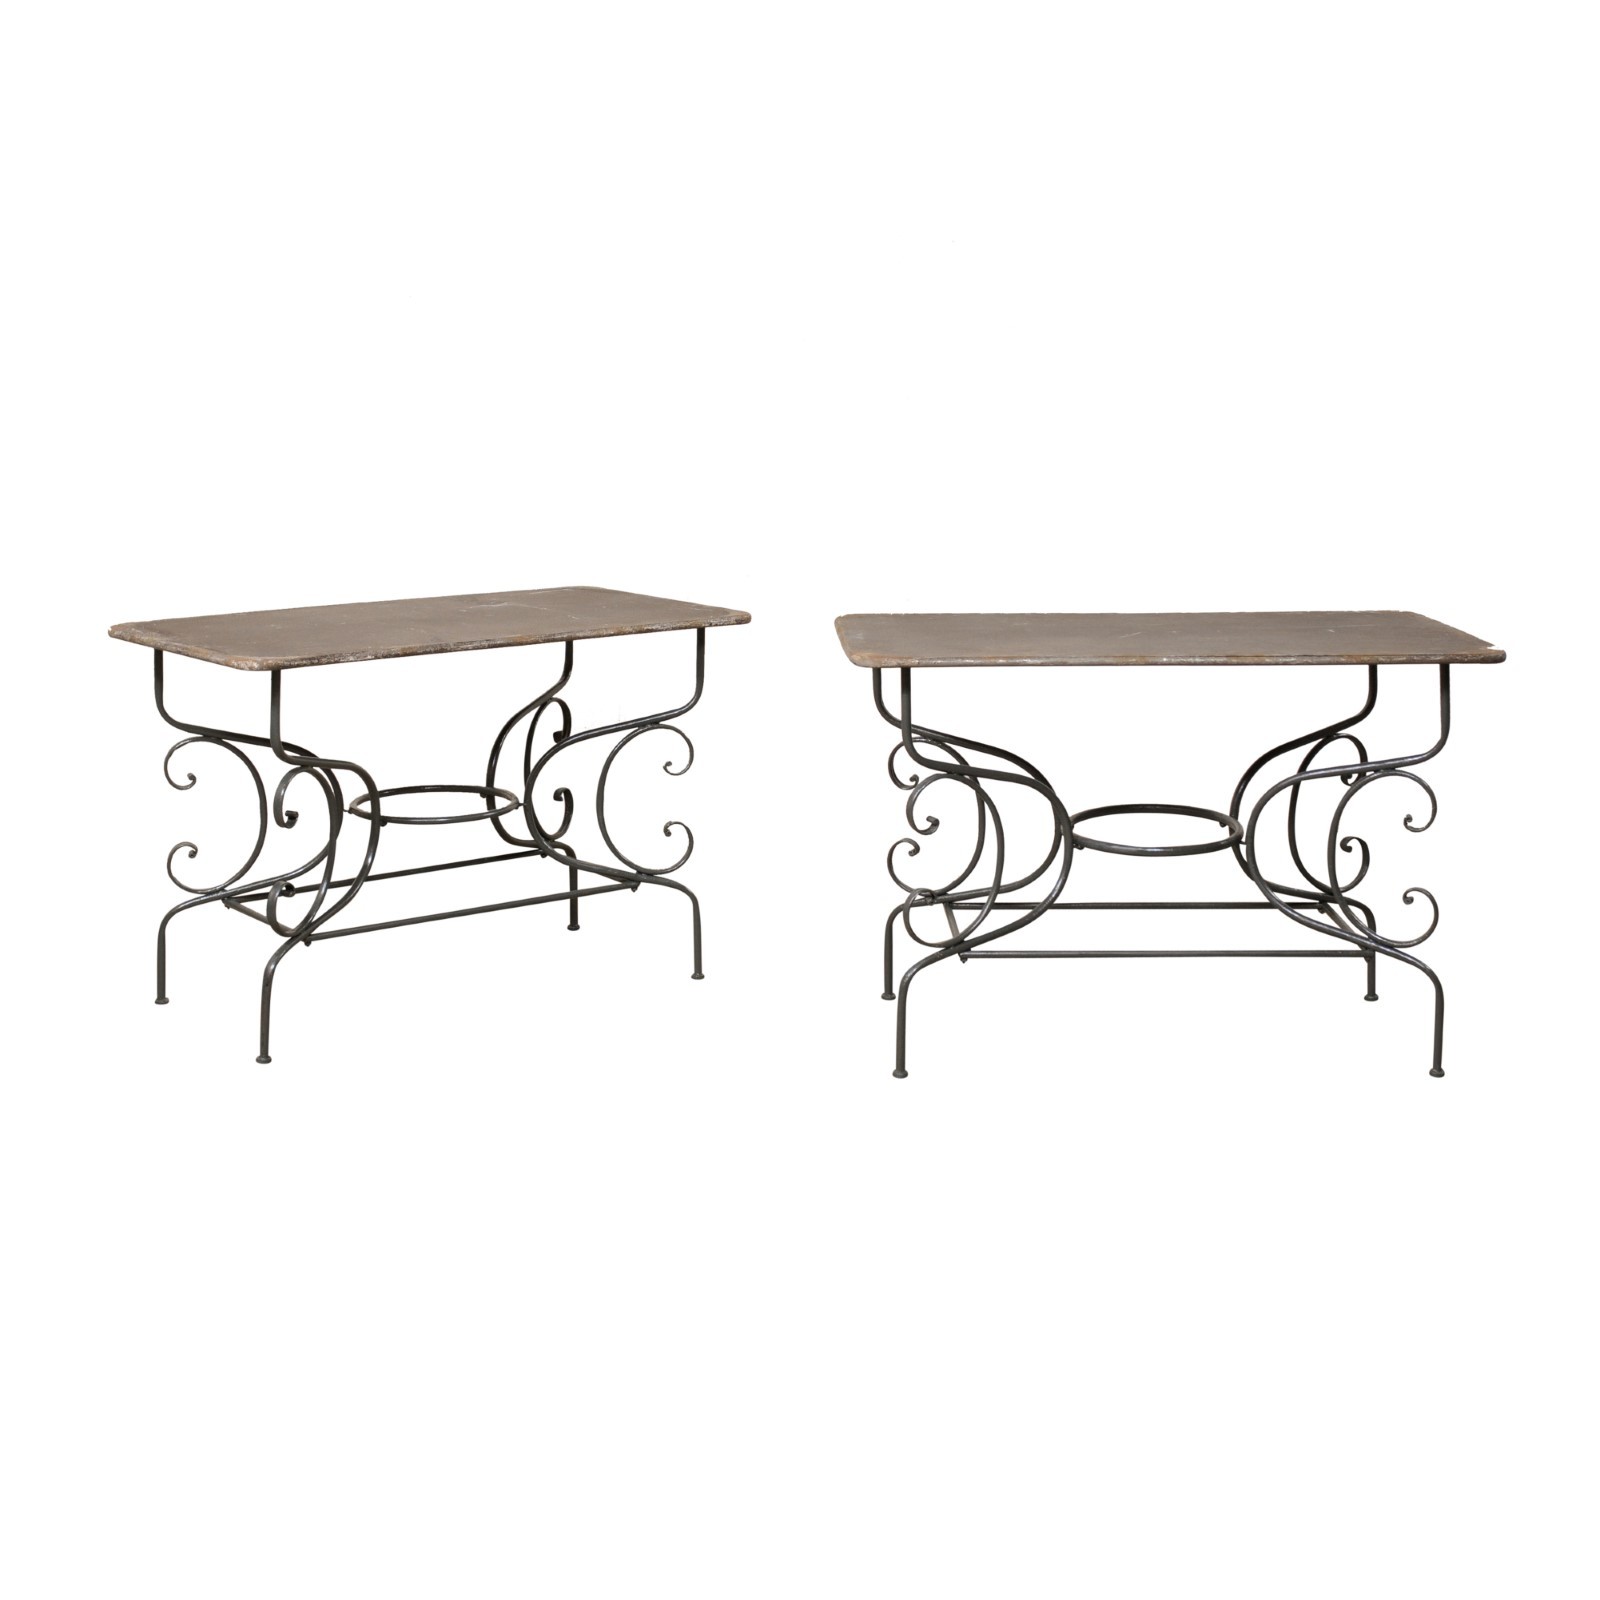 Mid-20th C. Metal Occasional Tables, France